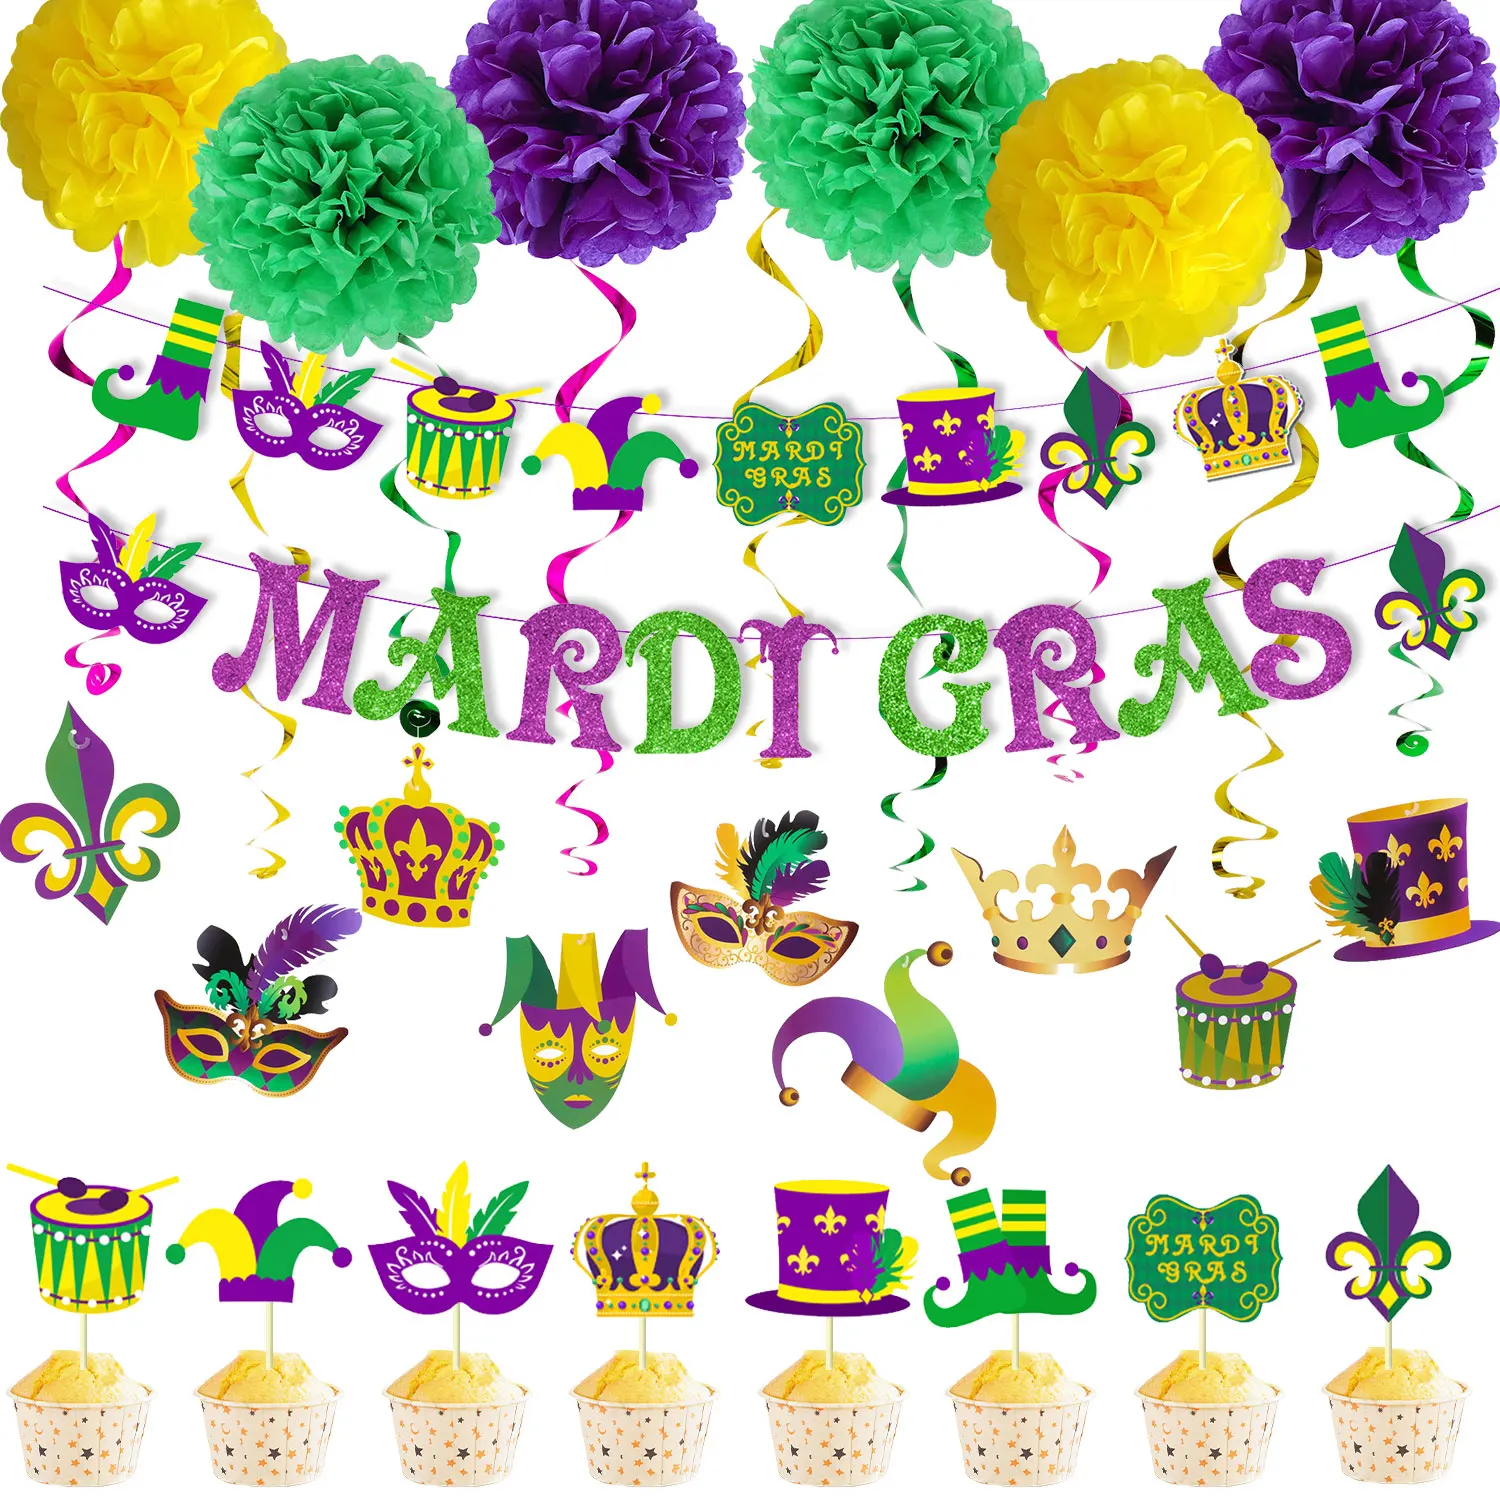 

Carnival Party Decorations, Mardi Gras Banner, Hanging Swirls Mask, Cake Toppers, Holiday Party Supplies, Home Decor